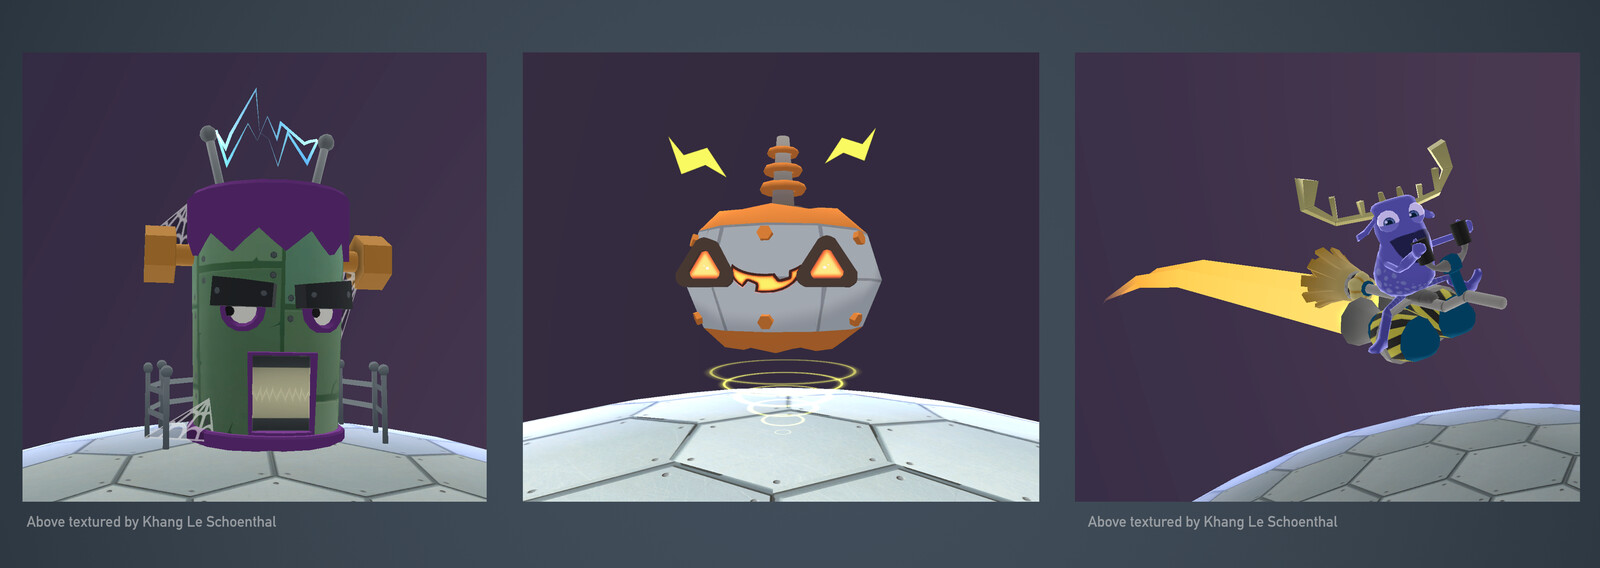 Halloween Props for Starbase MathTango: Cosmically Haunted House, Volt-o-lantern, and the Boom Broom. Starbase props feature a solid colored section that the player can recolor and customize.